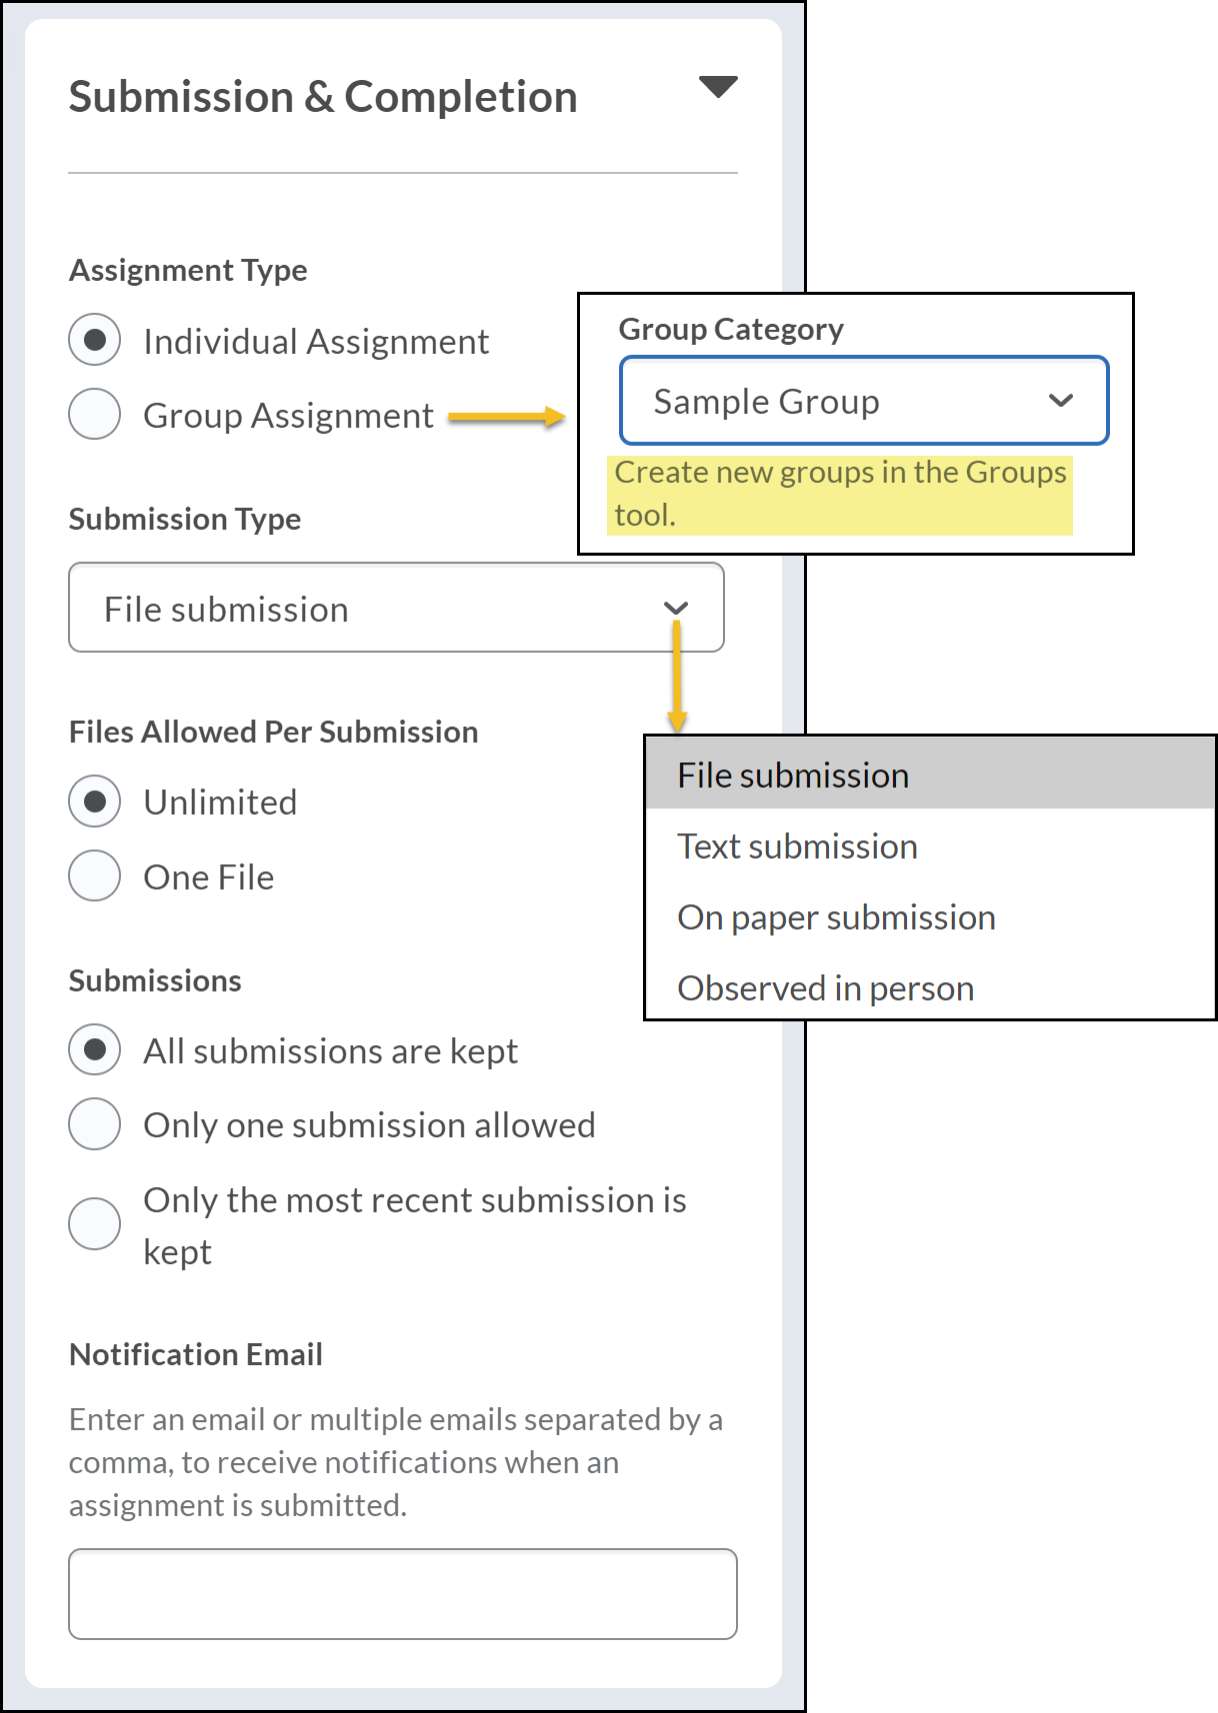 Submission & Completion window with choices for Assignment Type, Files Allowed, and Submissions.